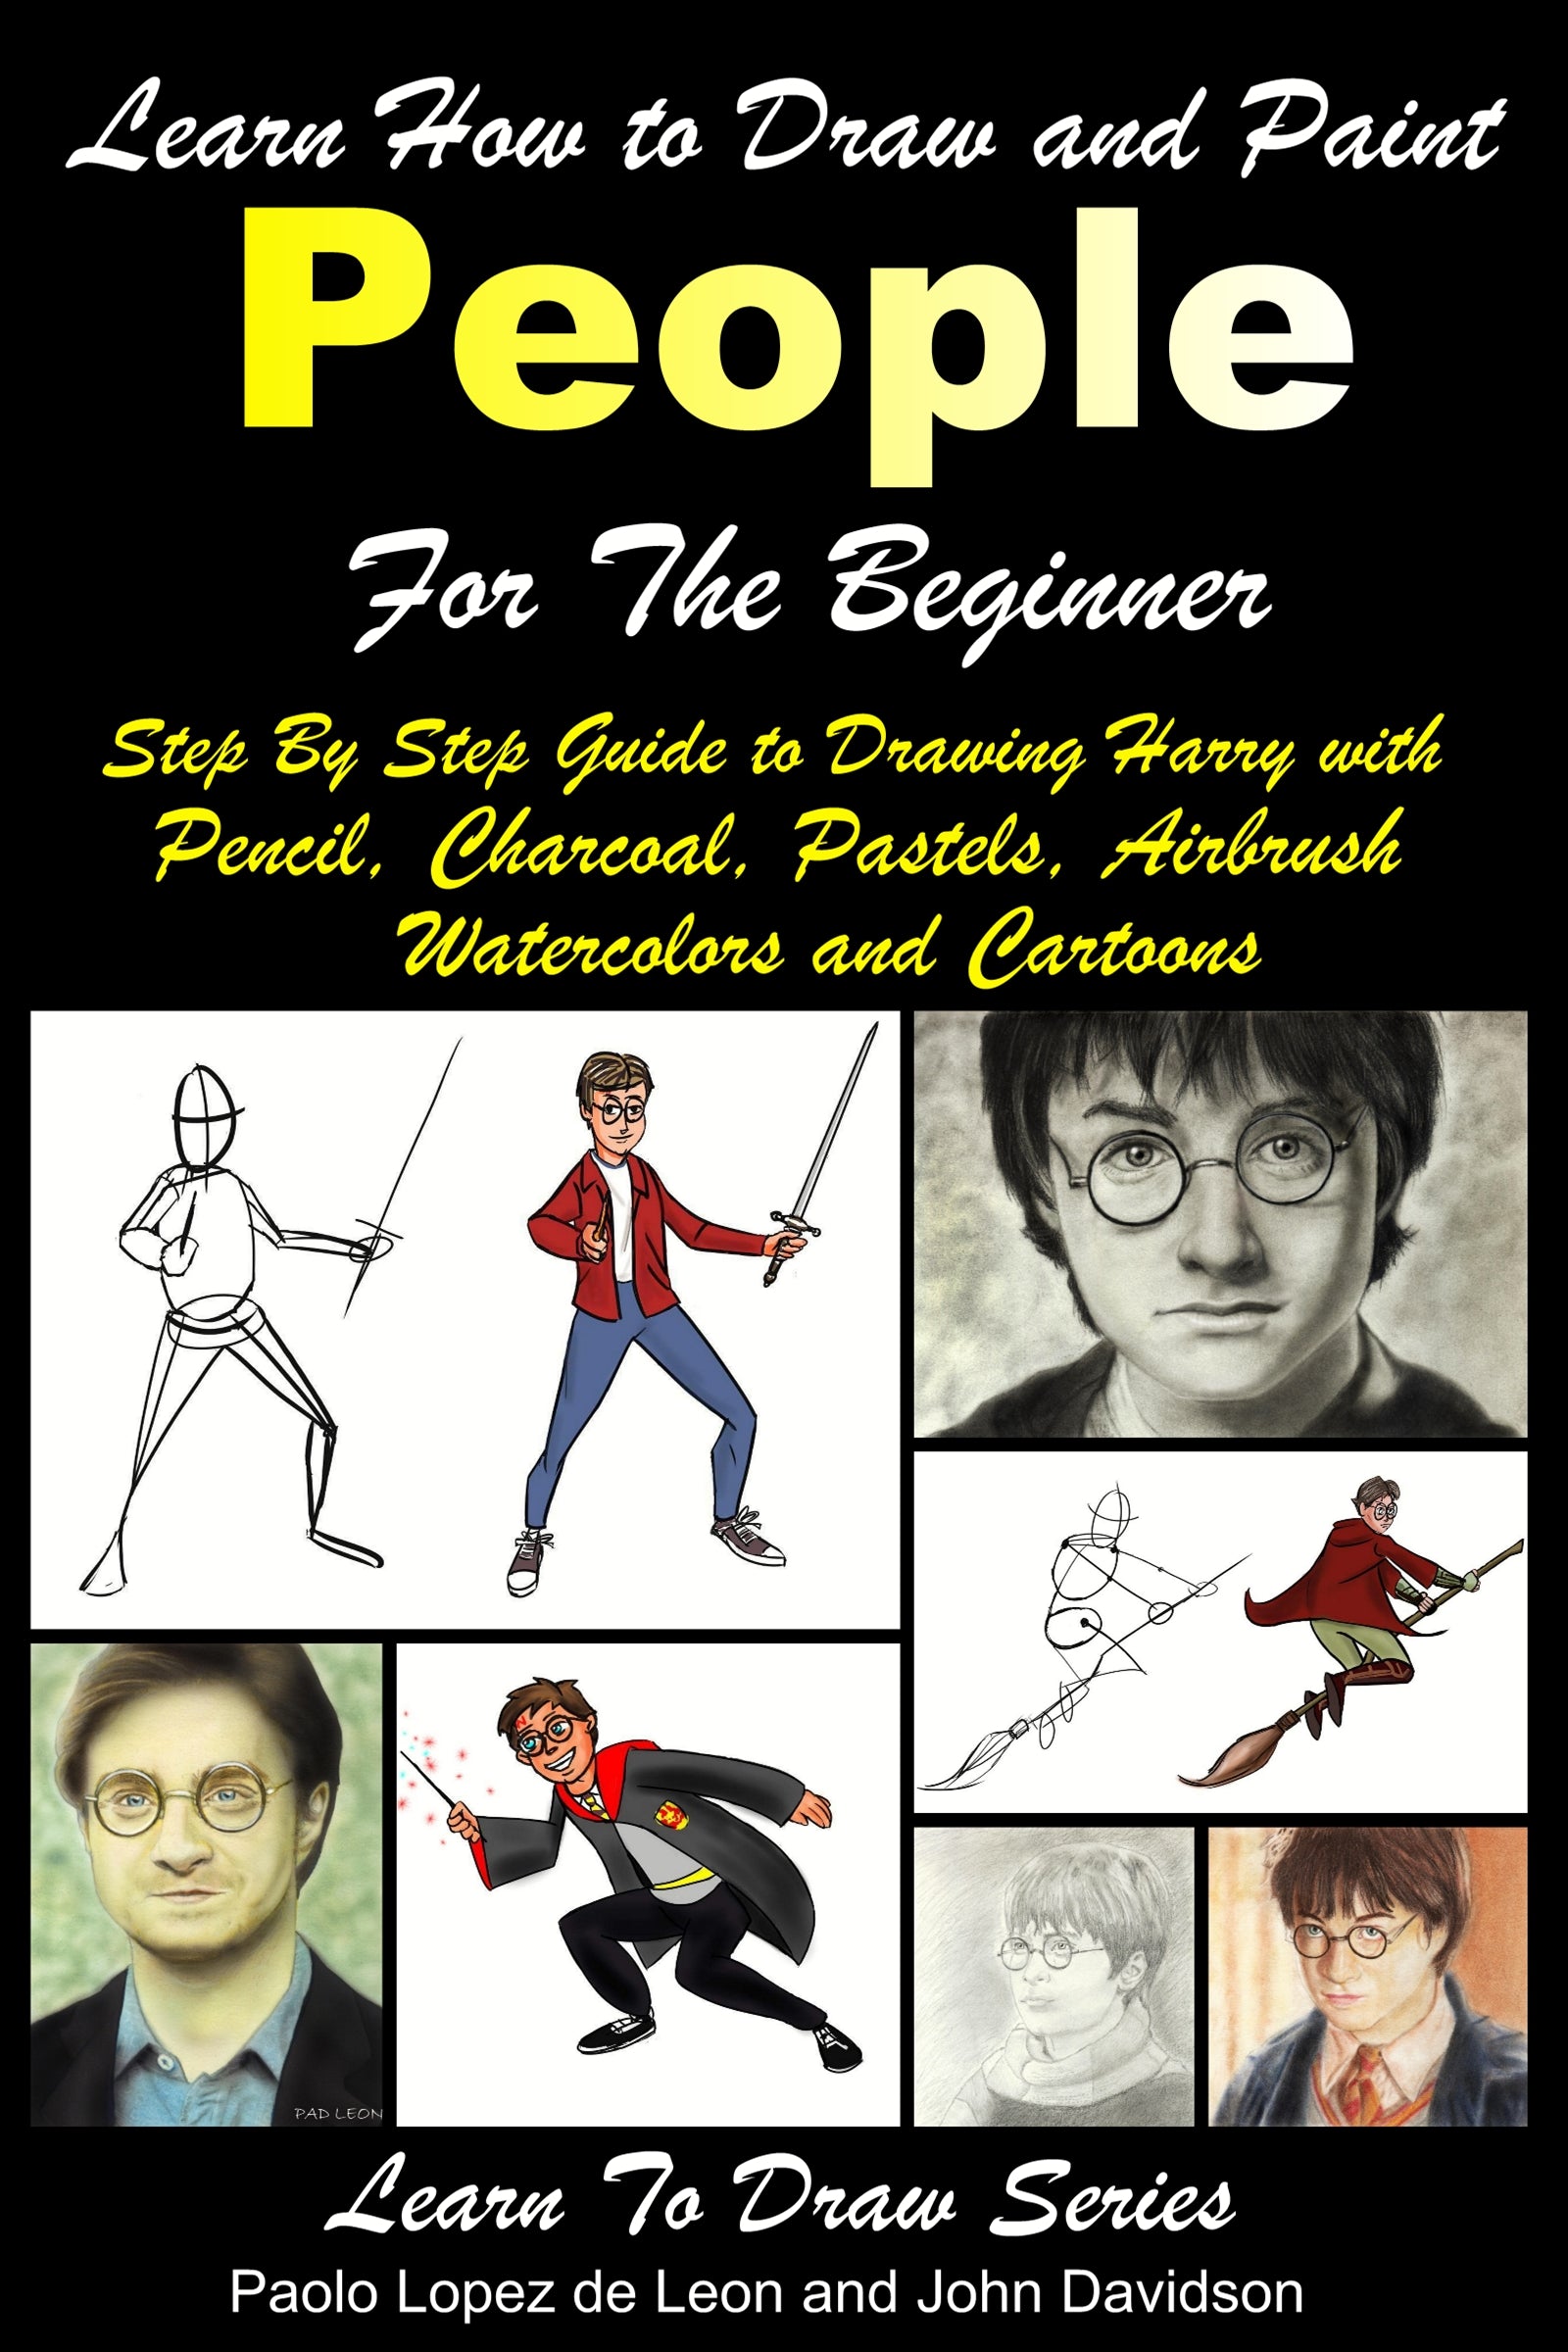 Learn How to Draw and Paint People For the Beginner - Step By Step